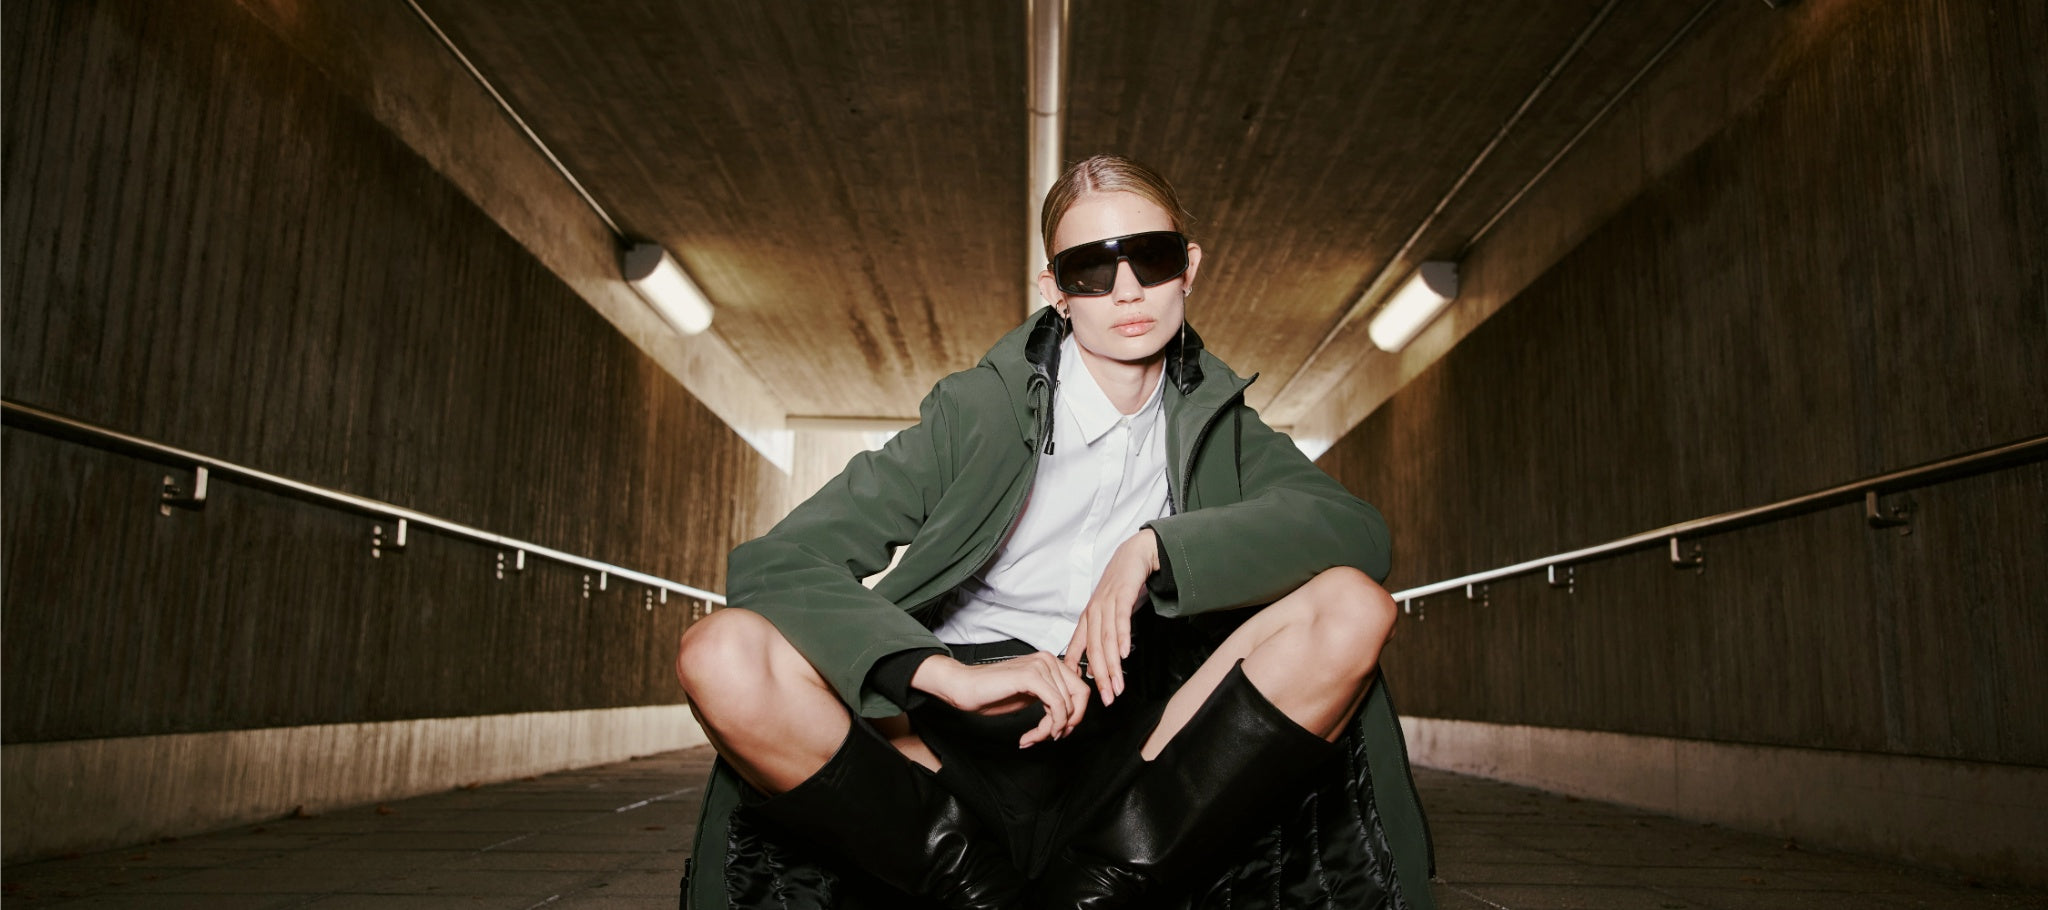 A blond woman wearing a white blouse, black boots, and a green jacket cowering on the ground